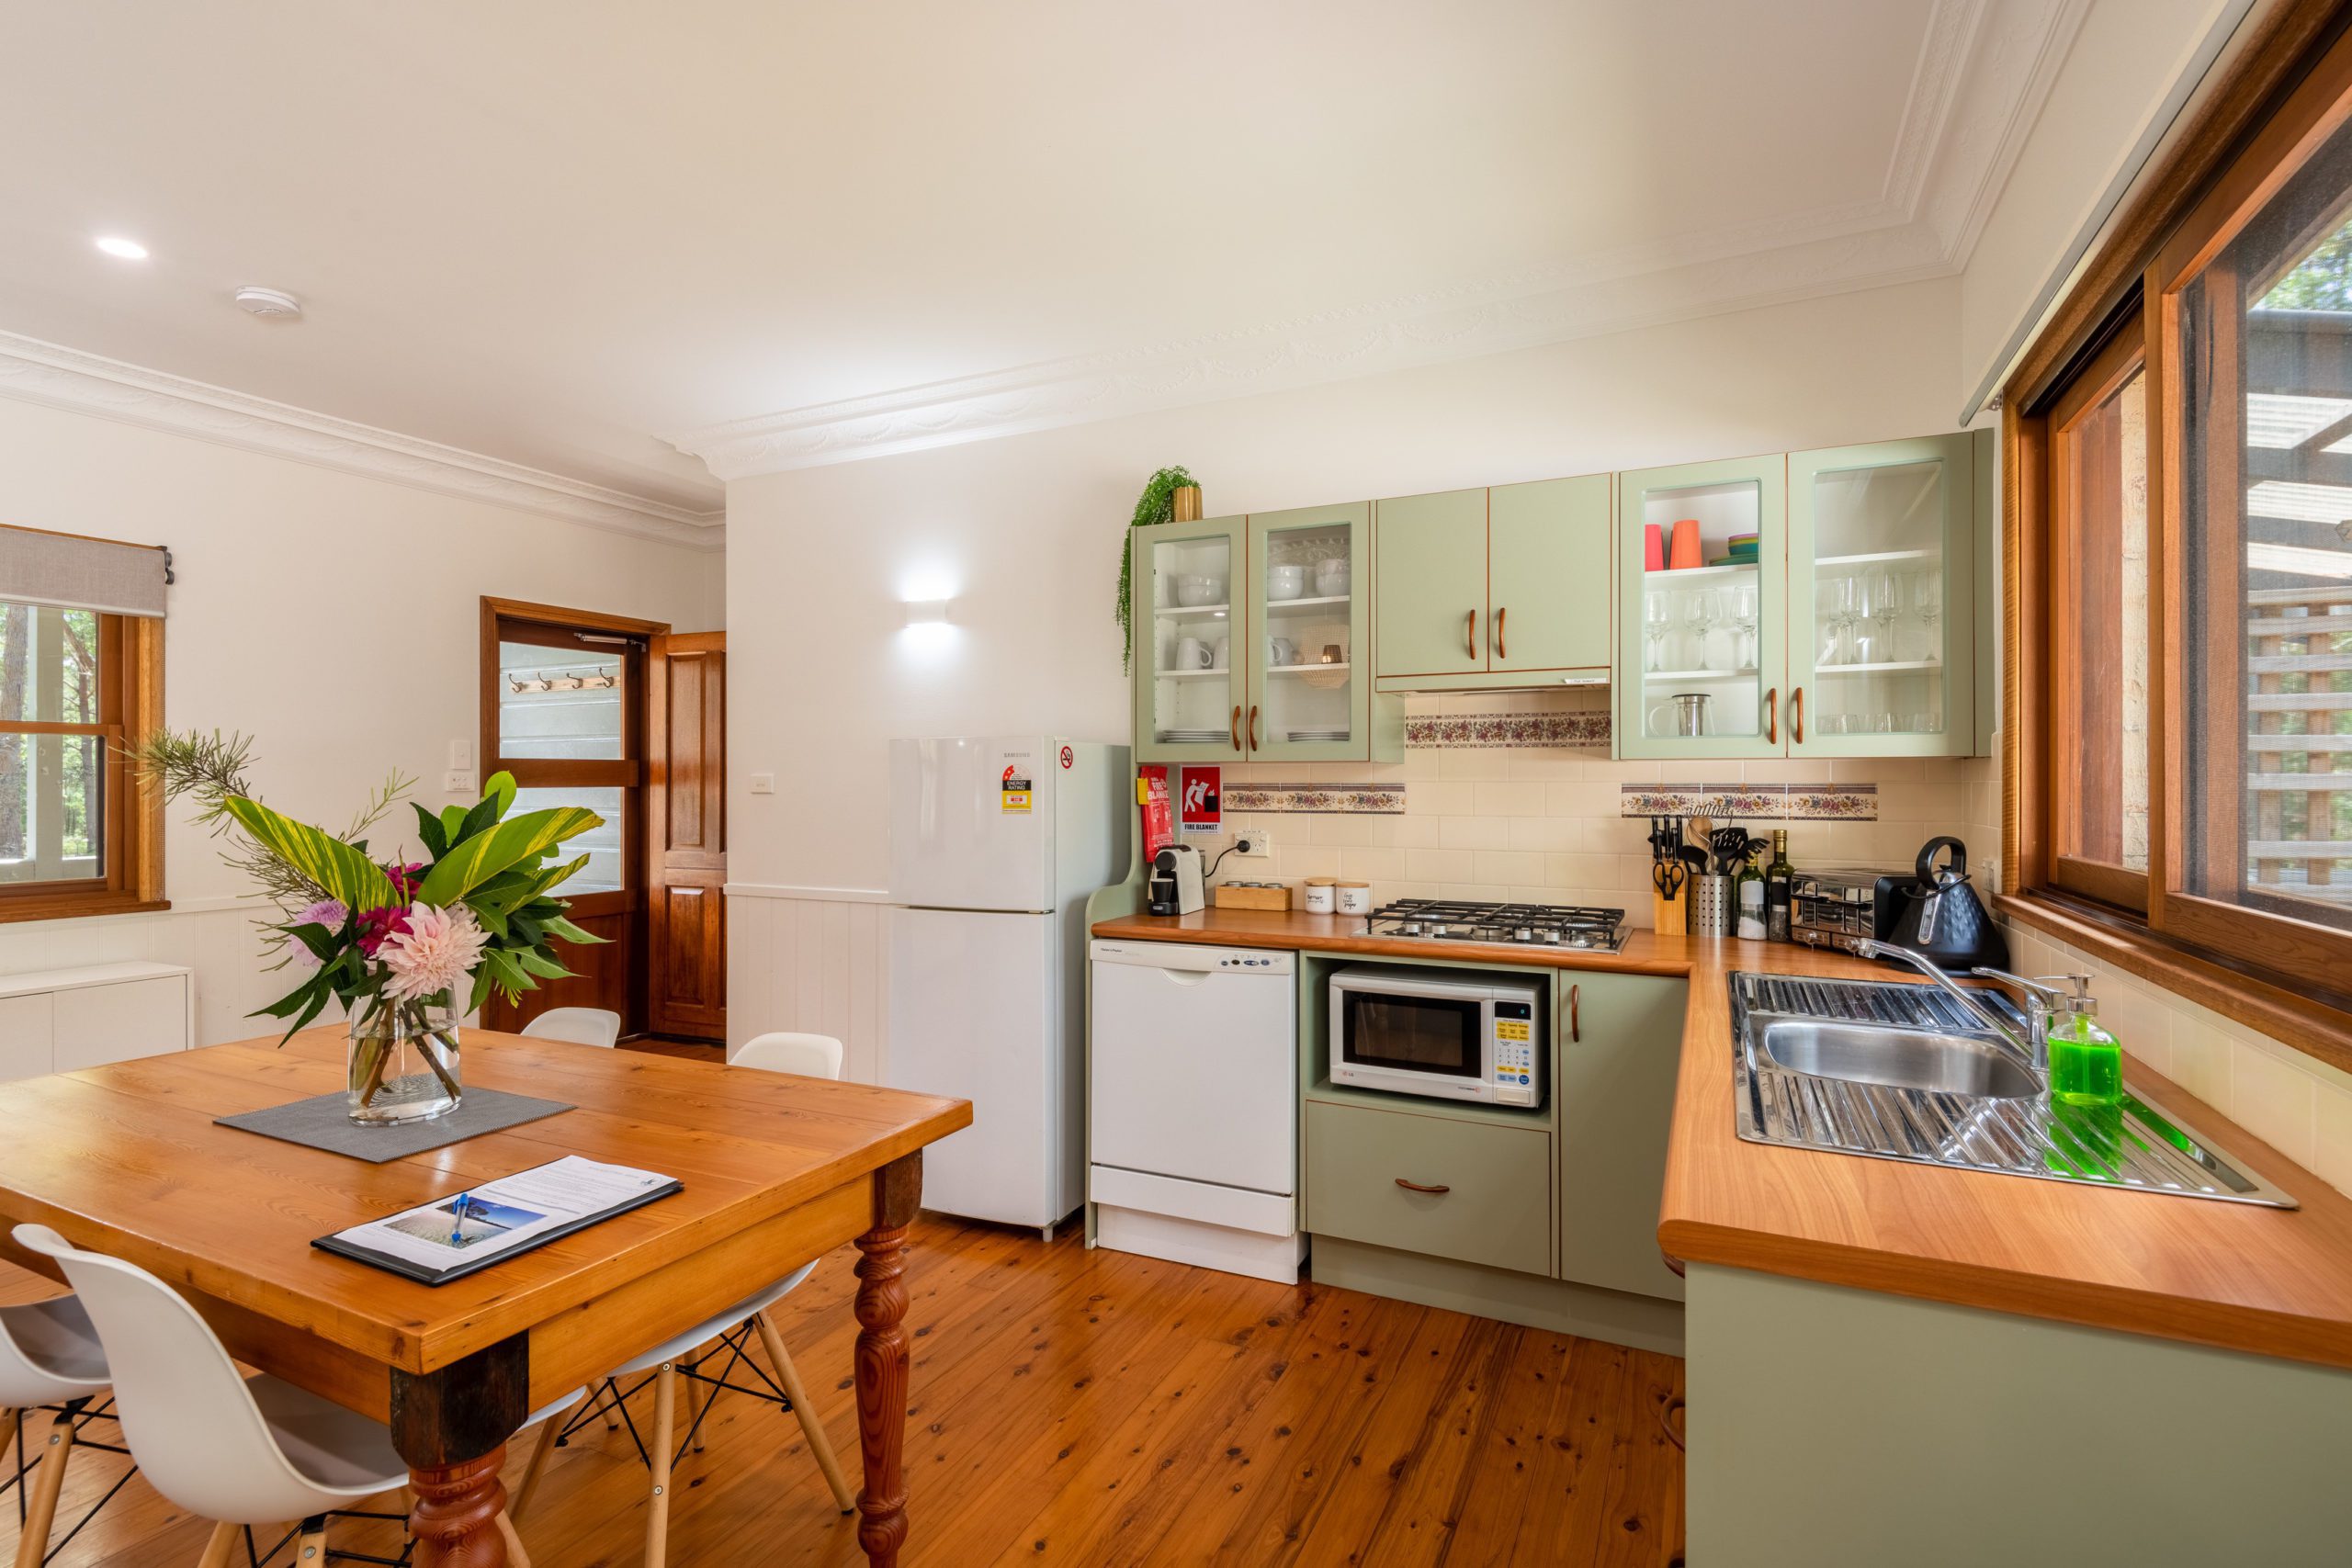 Bay and Bush Cottages: Abundant Space for cooking or dining